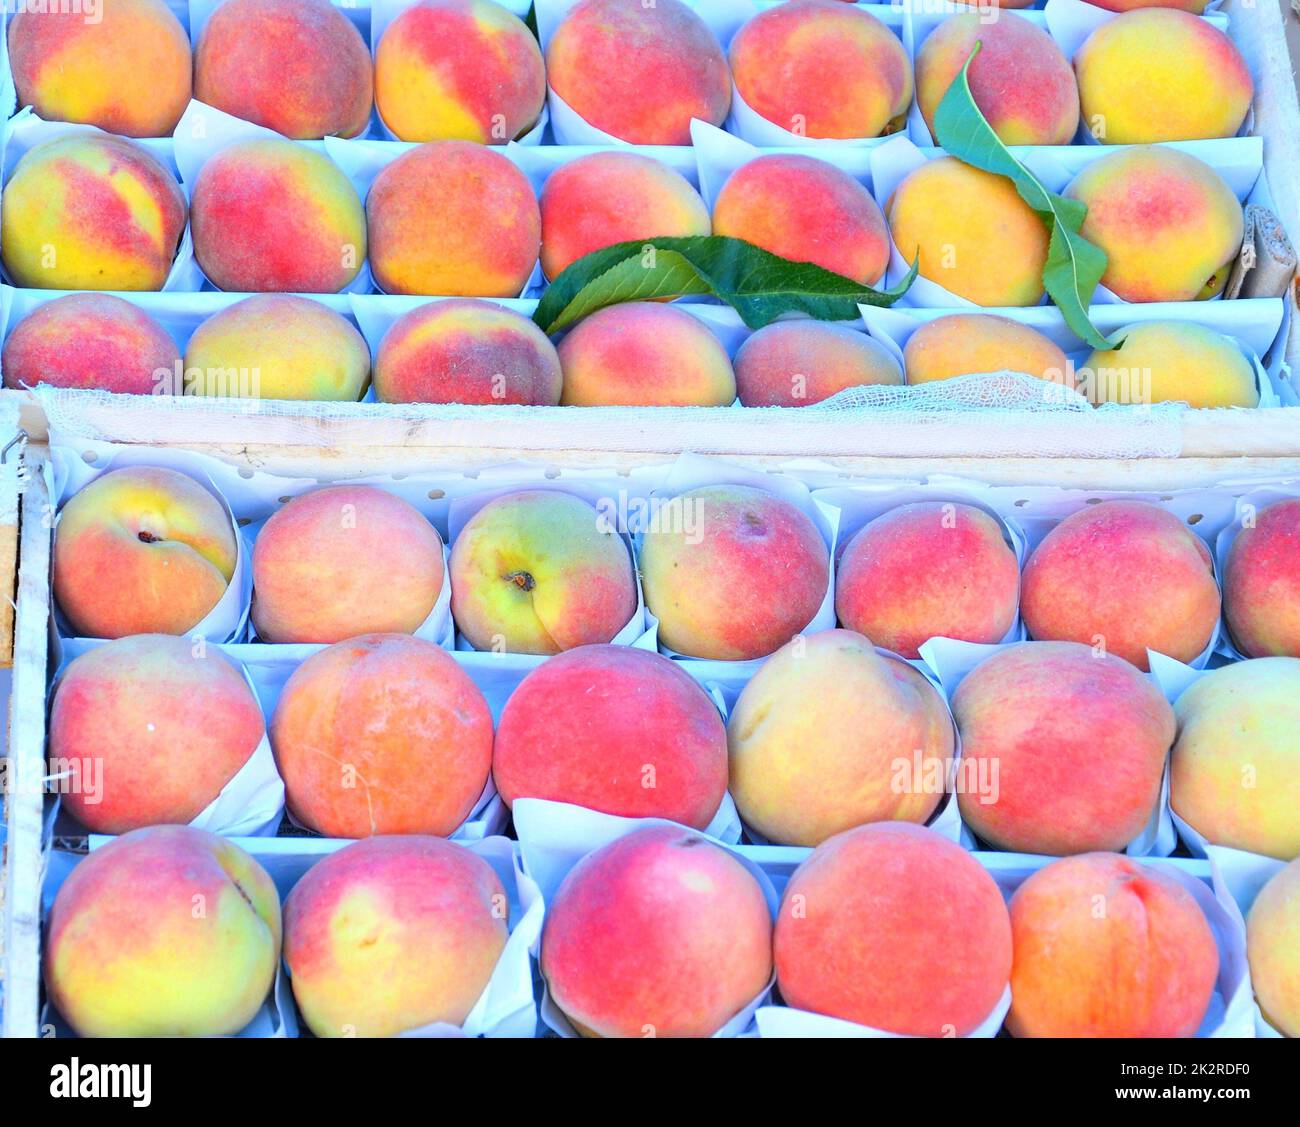 Ripe peaches (from Lat. Persicus) of the new harvest Stock Photo